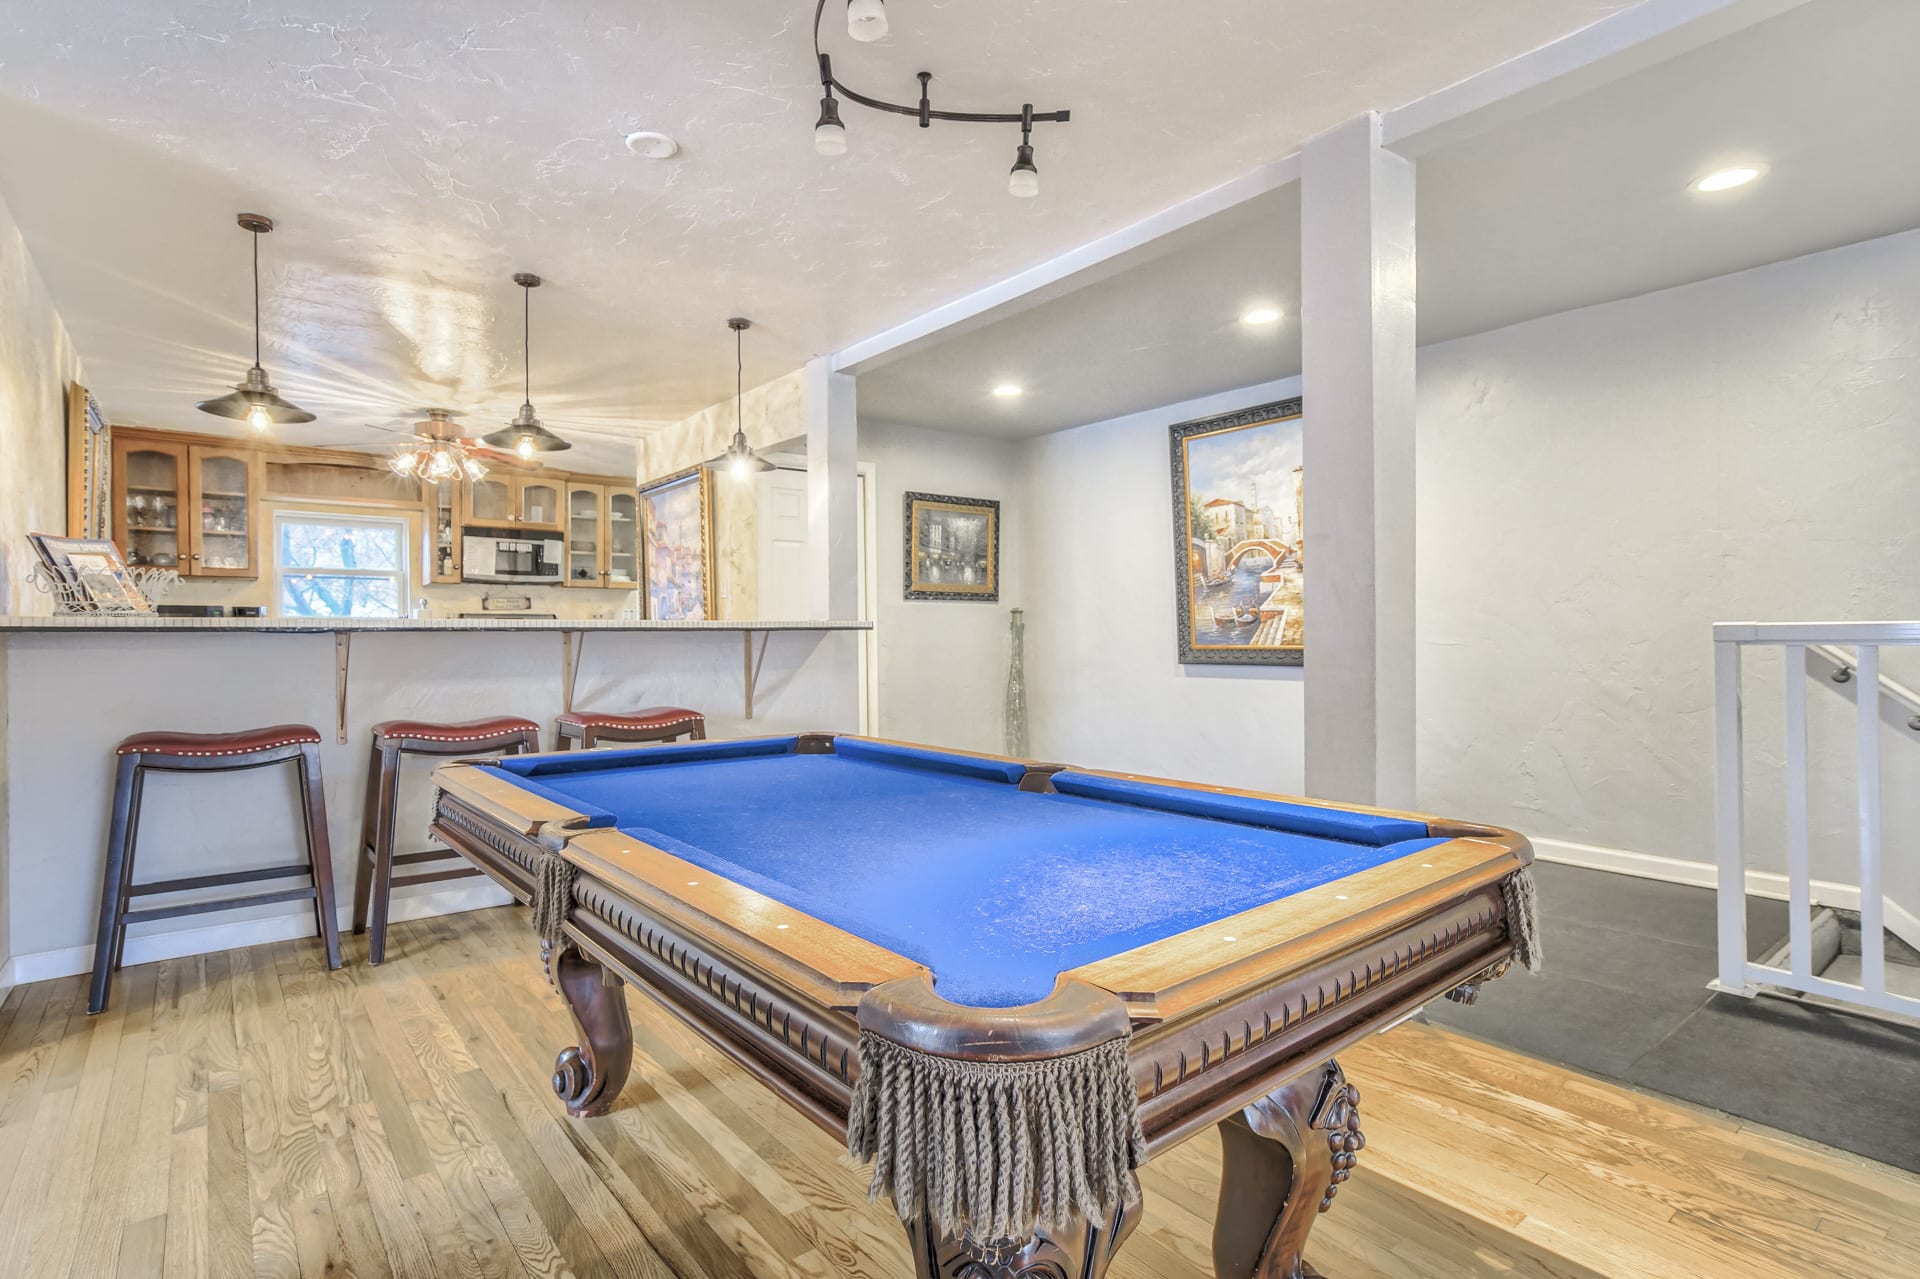 Property Image 2 - 2BD | The Keys Art Gallery in Old Colorado City| Pool Table Lounge